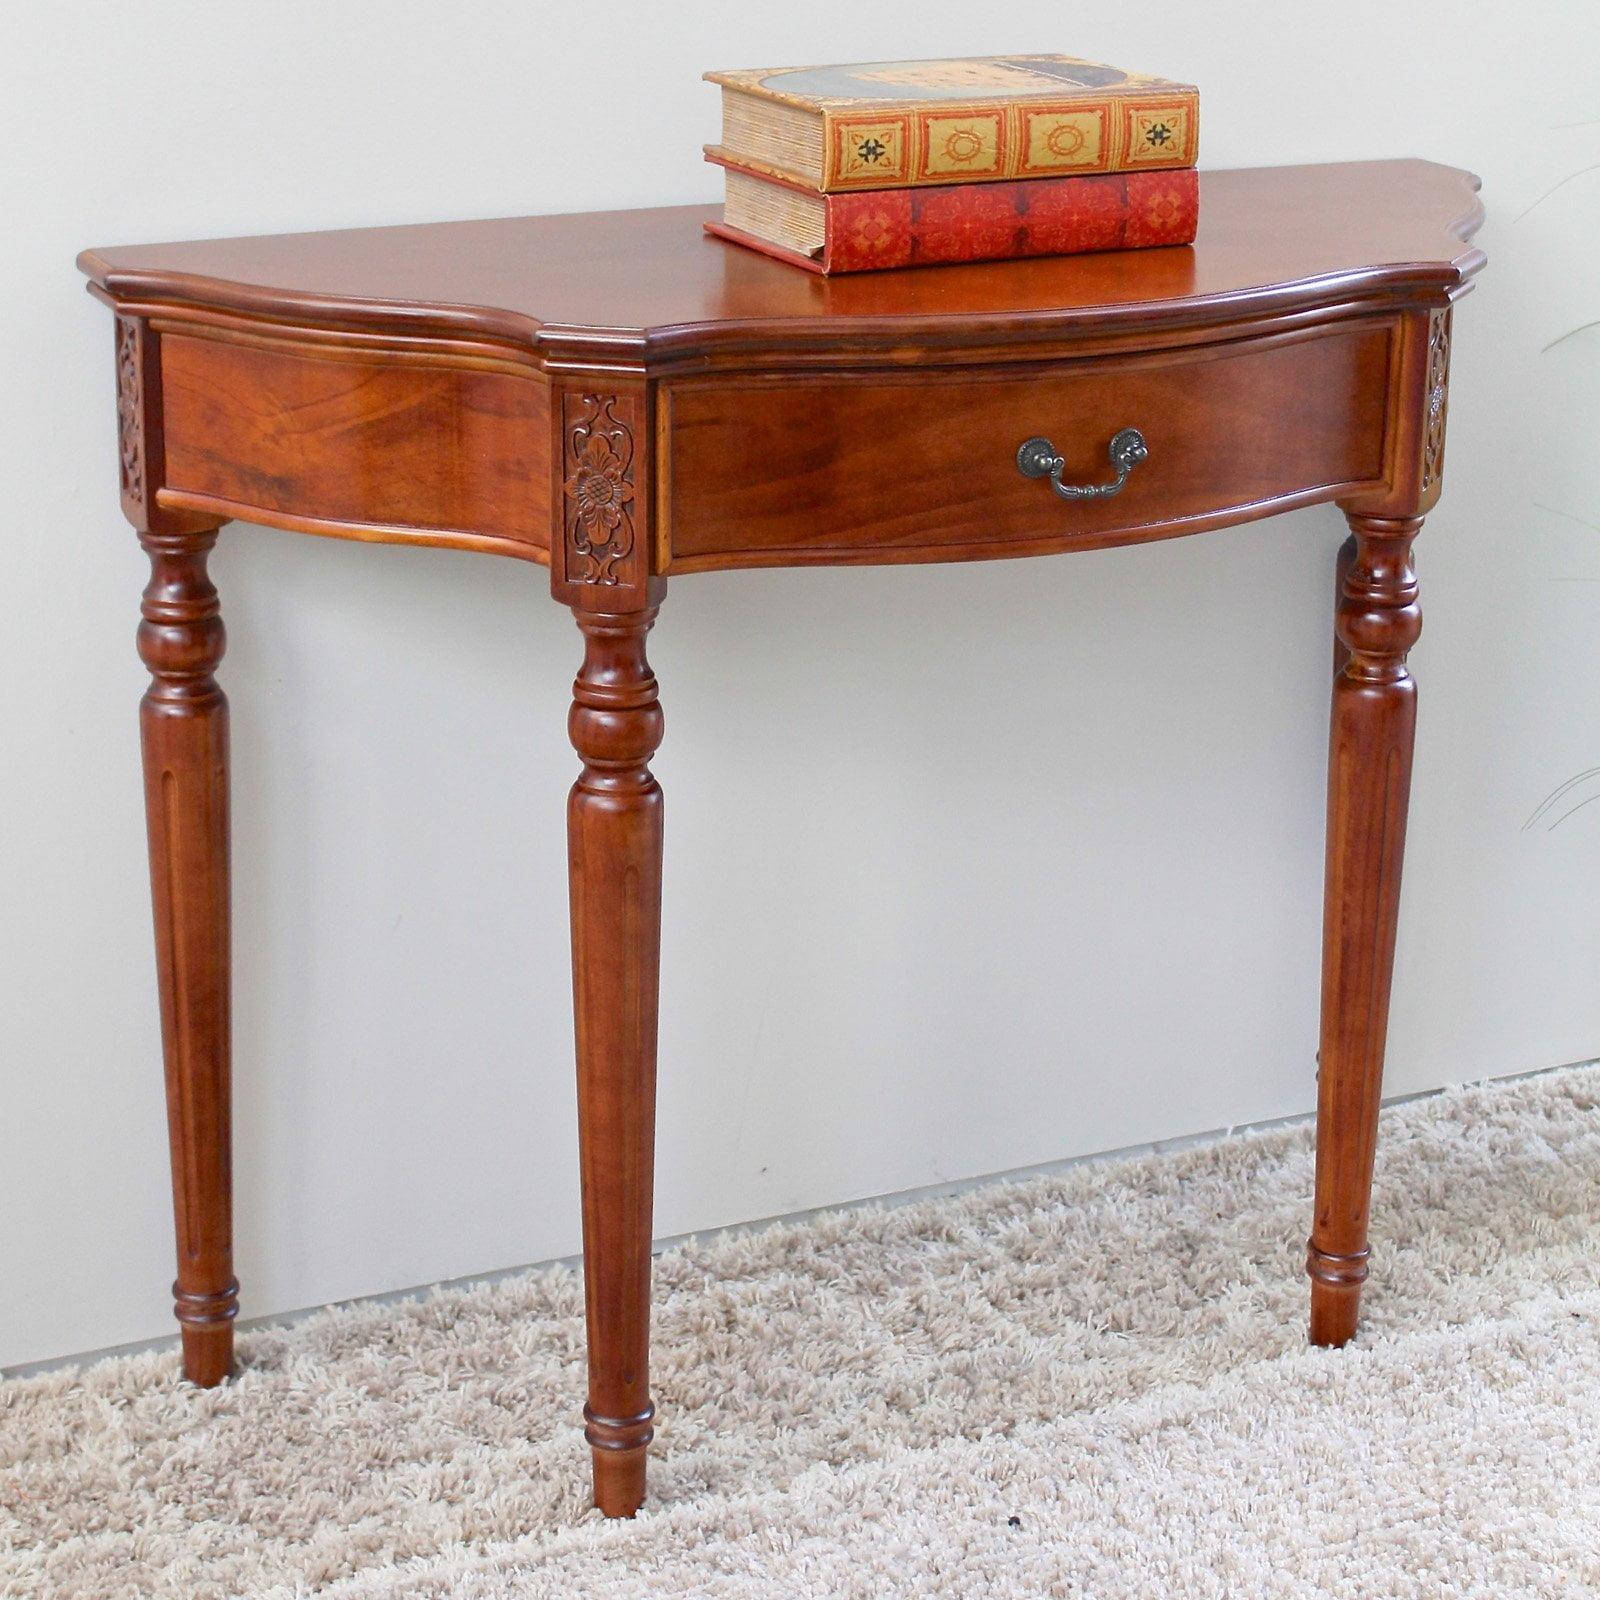 Windsor Elegance Walnut Stain Hand-Carved Demilune Console Table with Storage